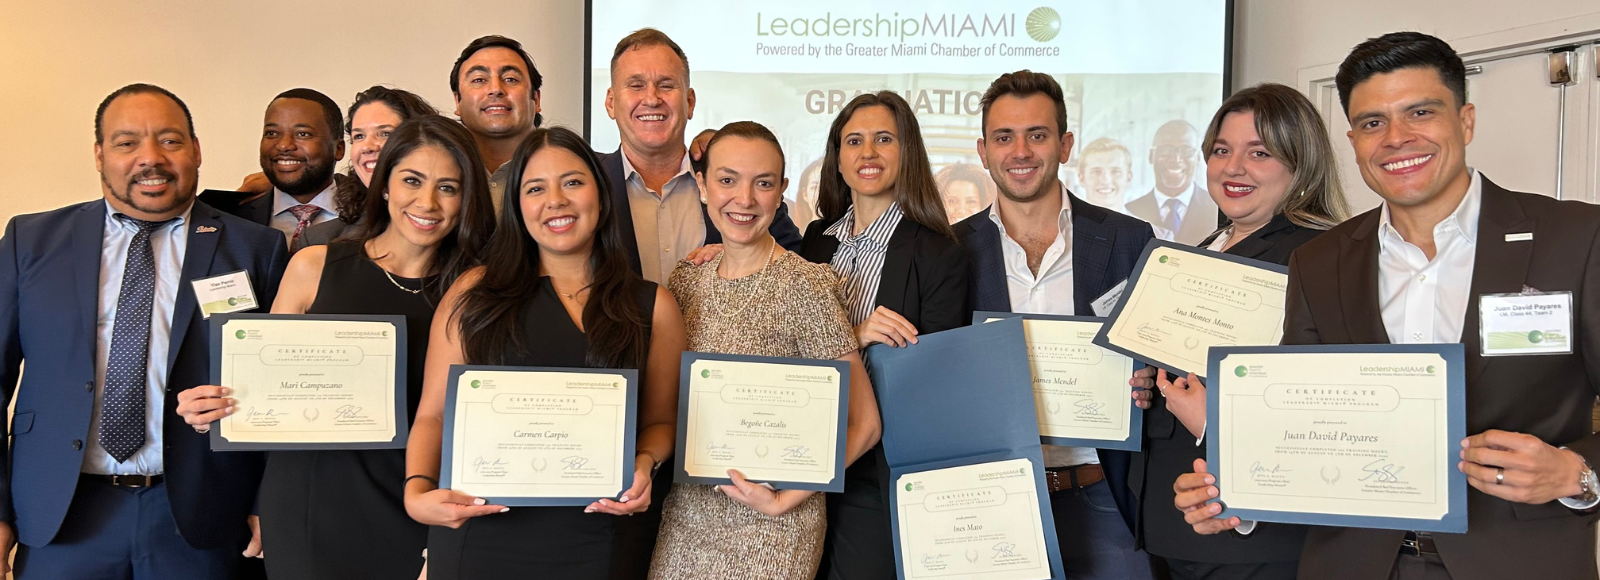 Leadership Miami Class 44 Projects